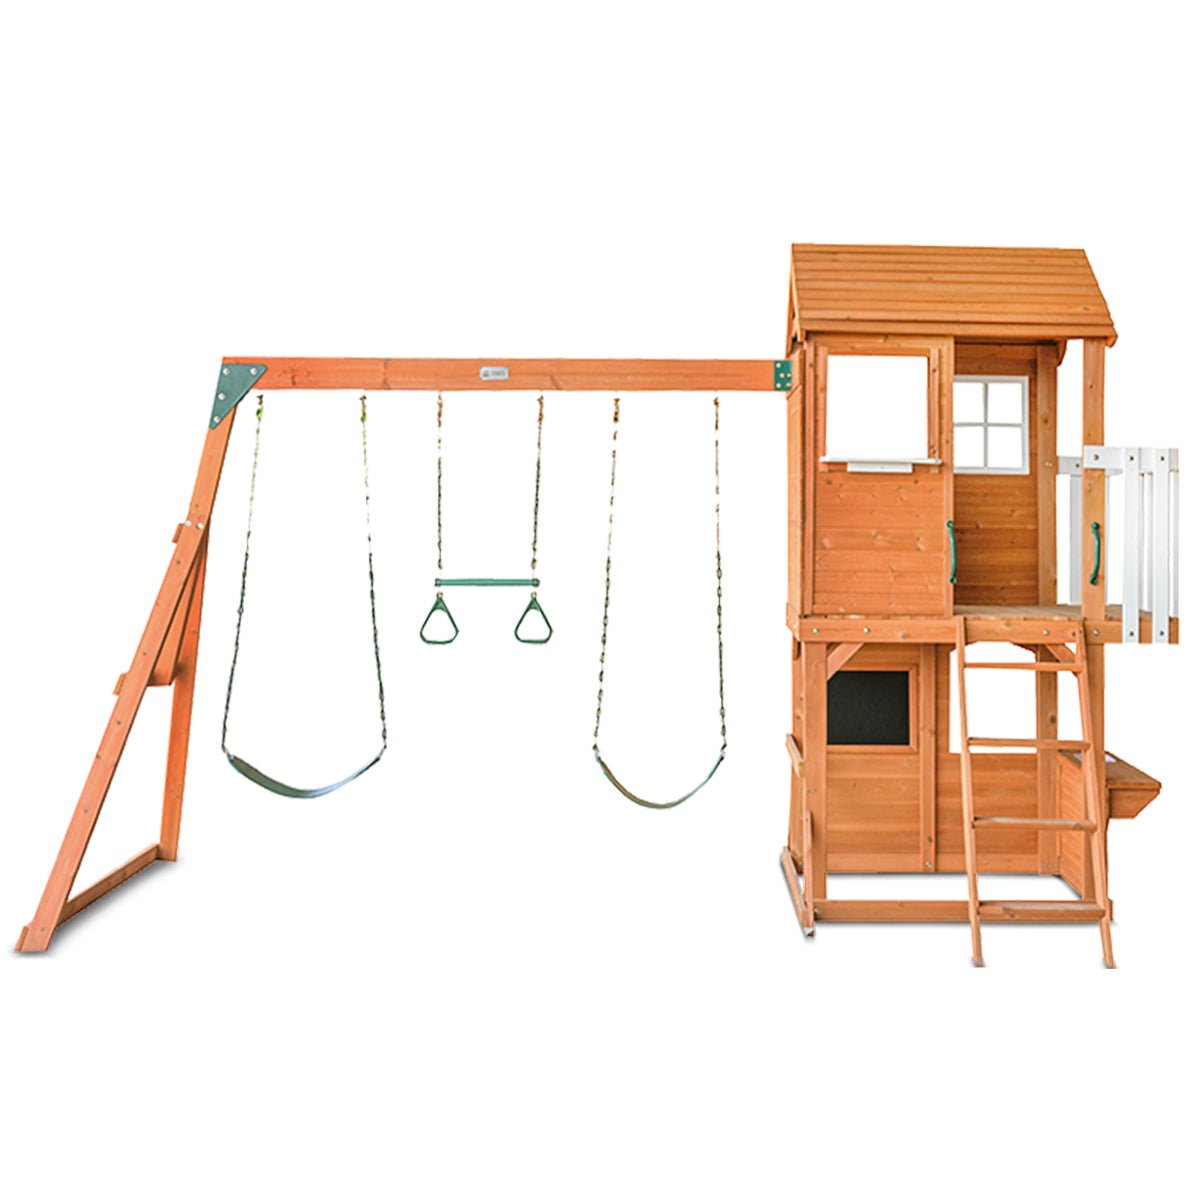 Springlake Play Centre - Buy Now for Exciting Green Slide Play